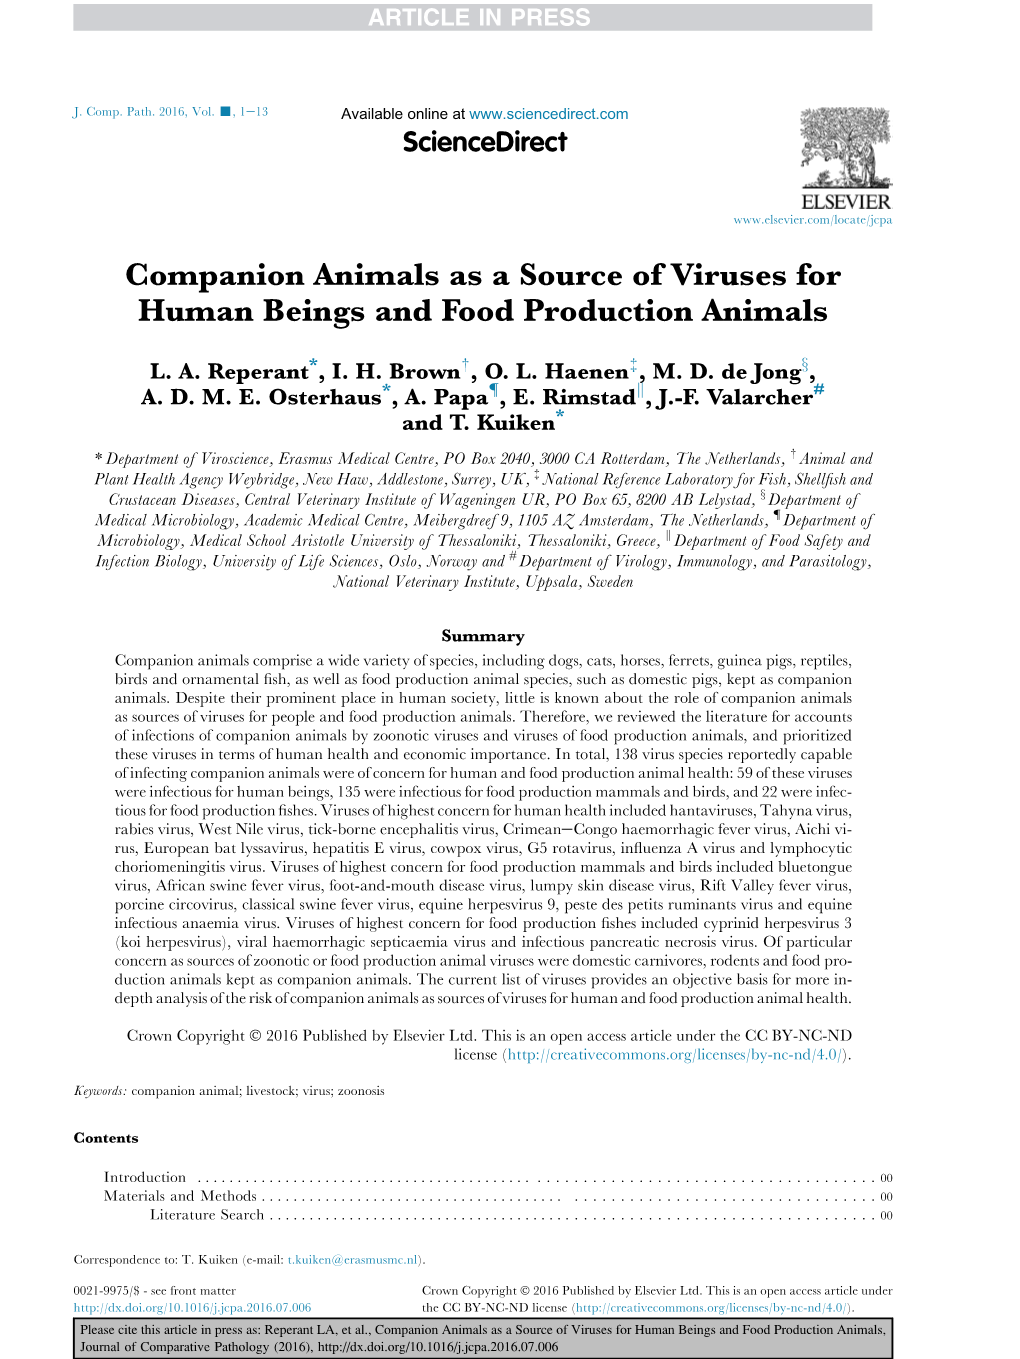 Companion Animals As a Source of Viruses for Human Beings and Food Production Animals